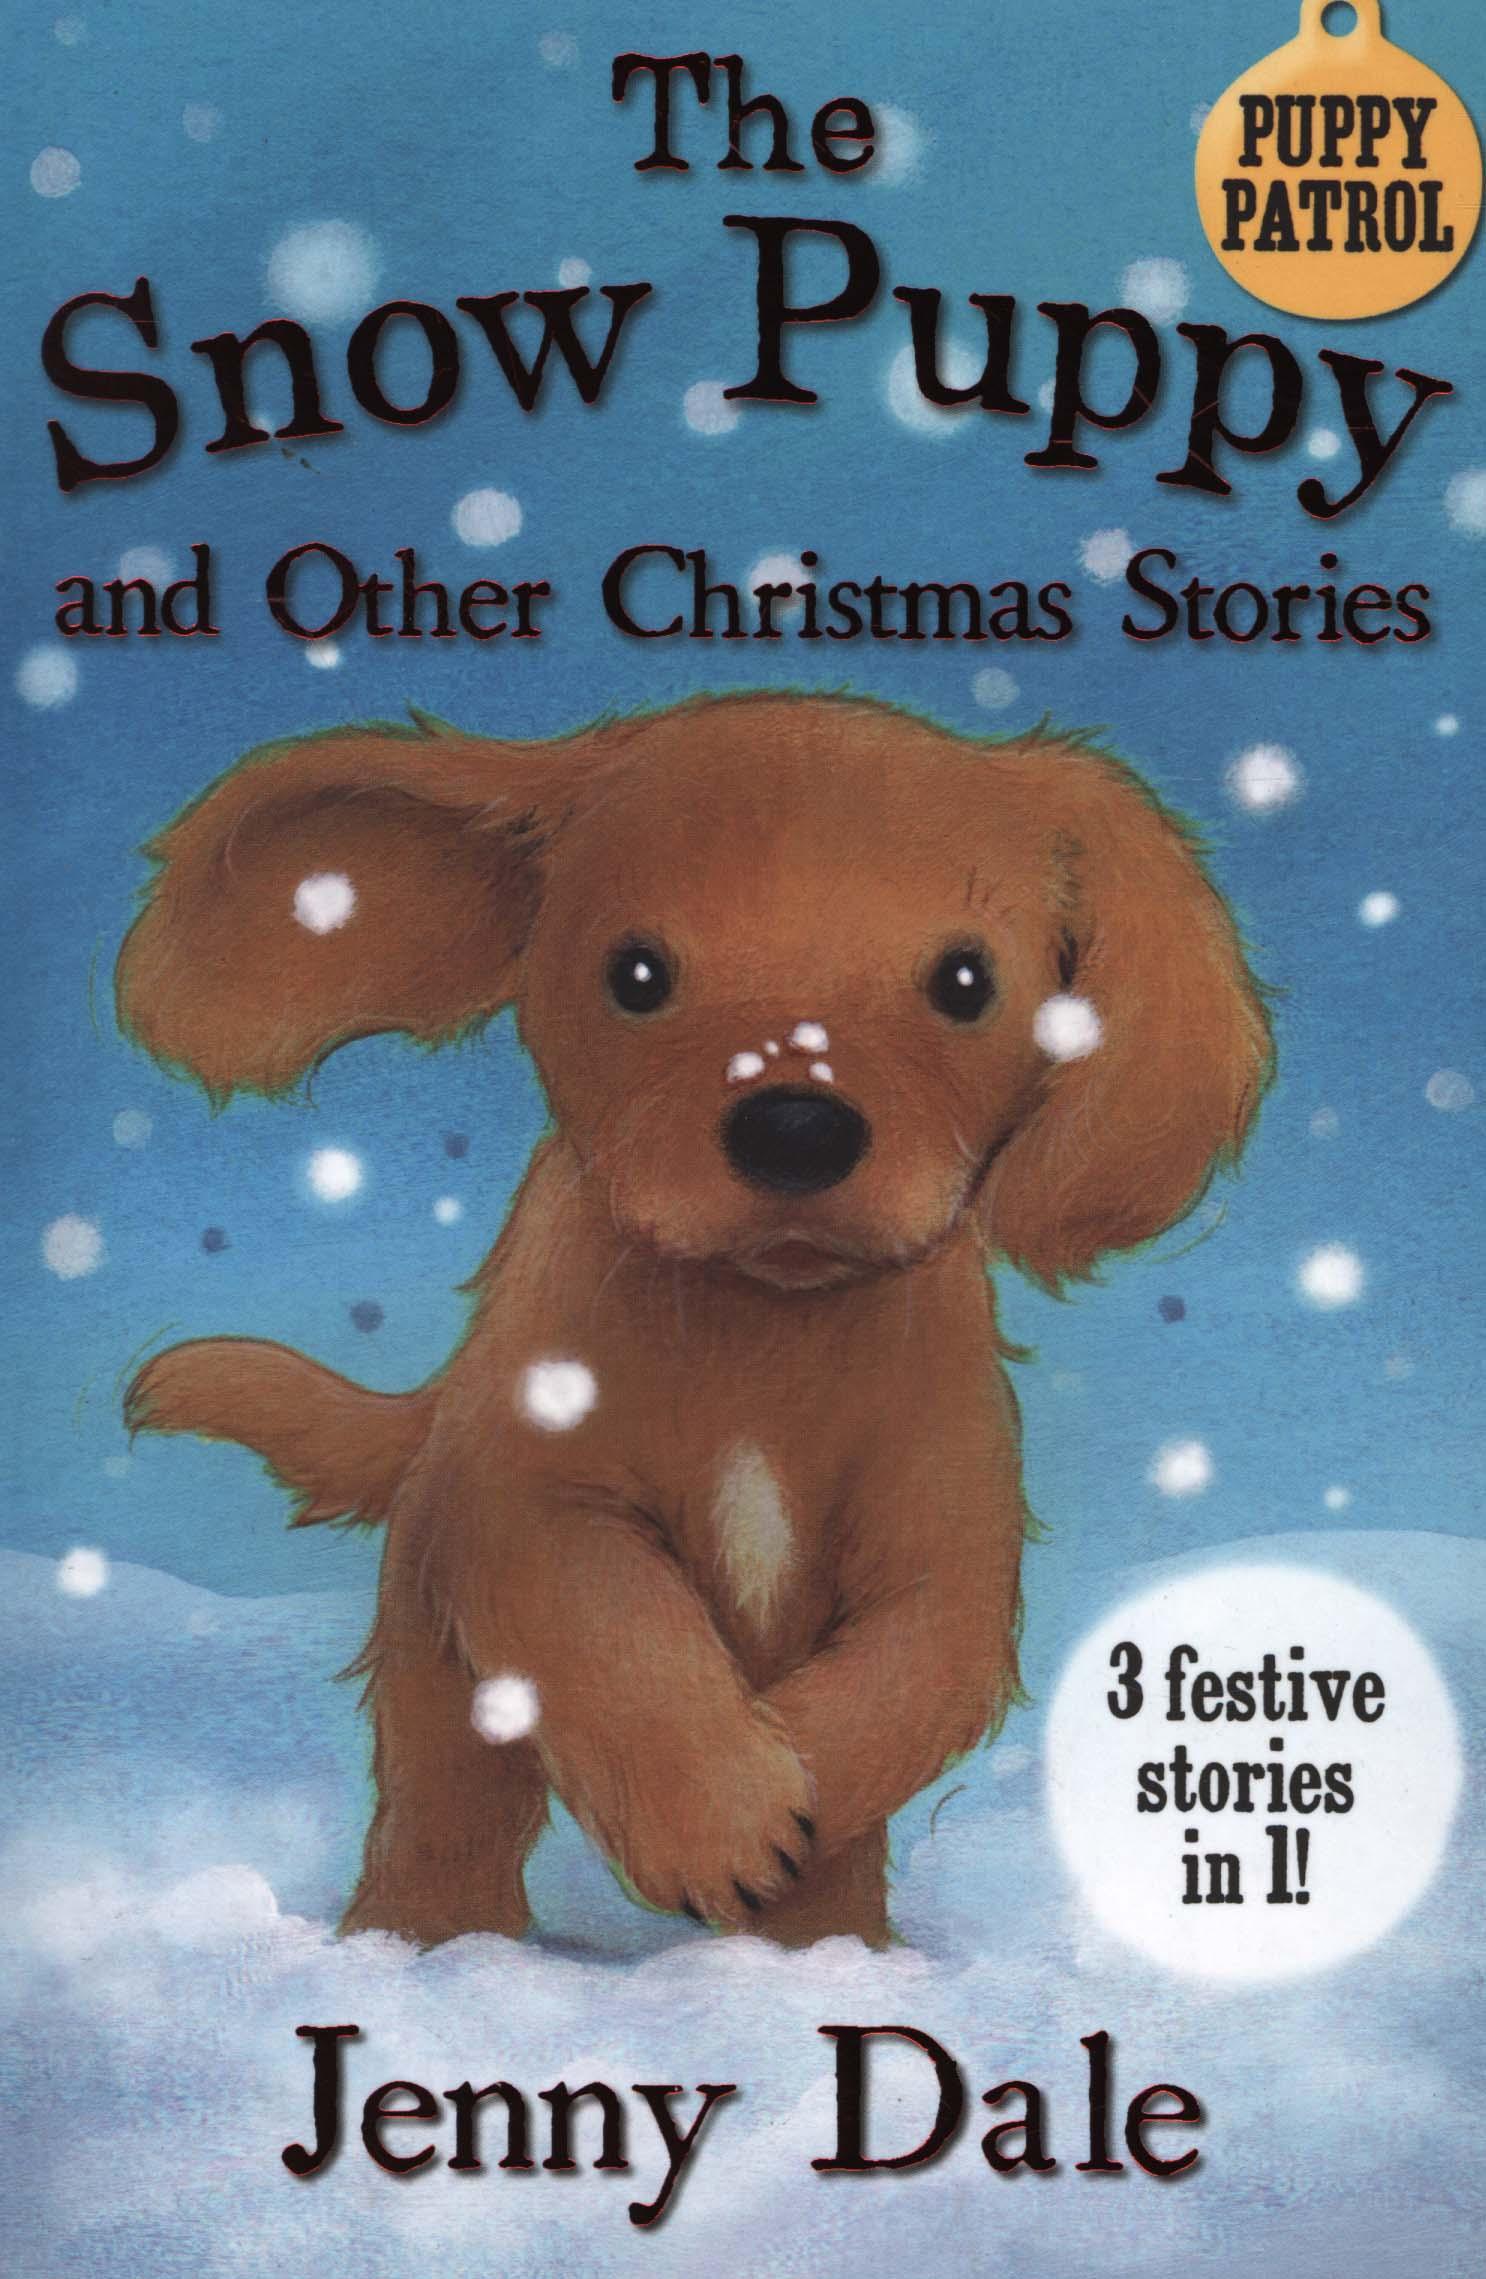 Snow Puppy and other Christmas stories